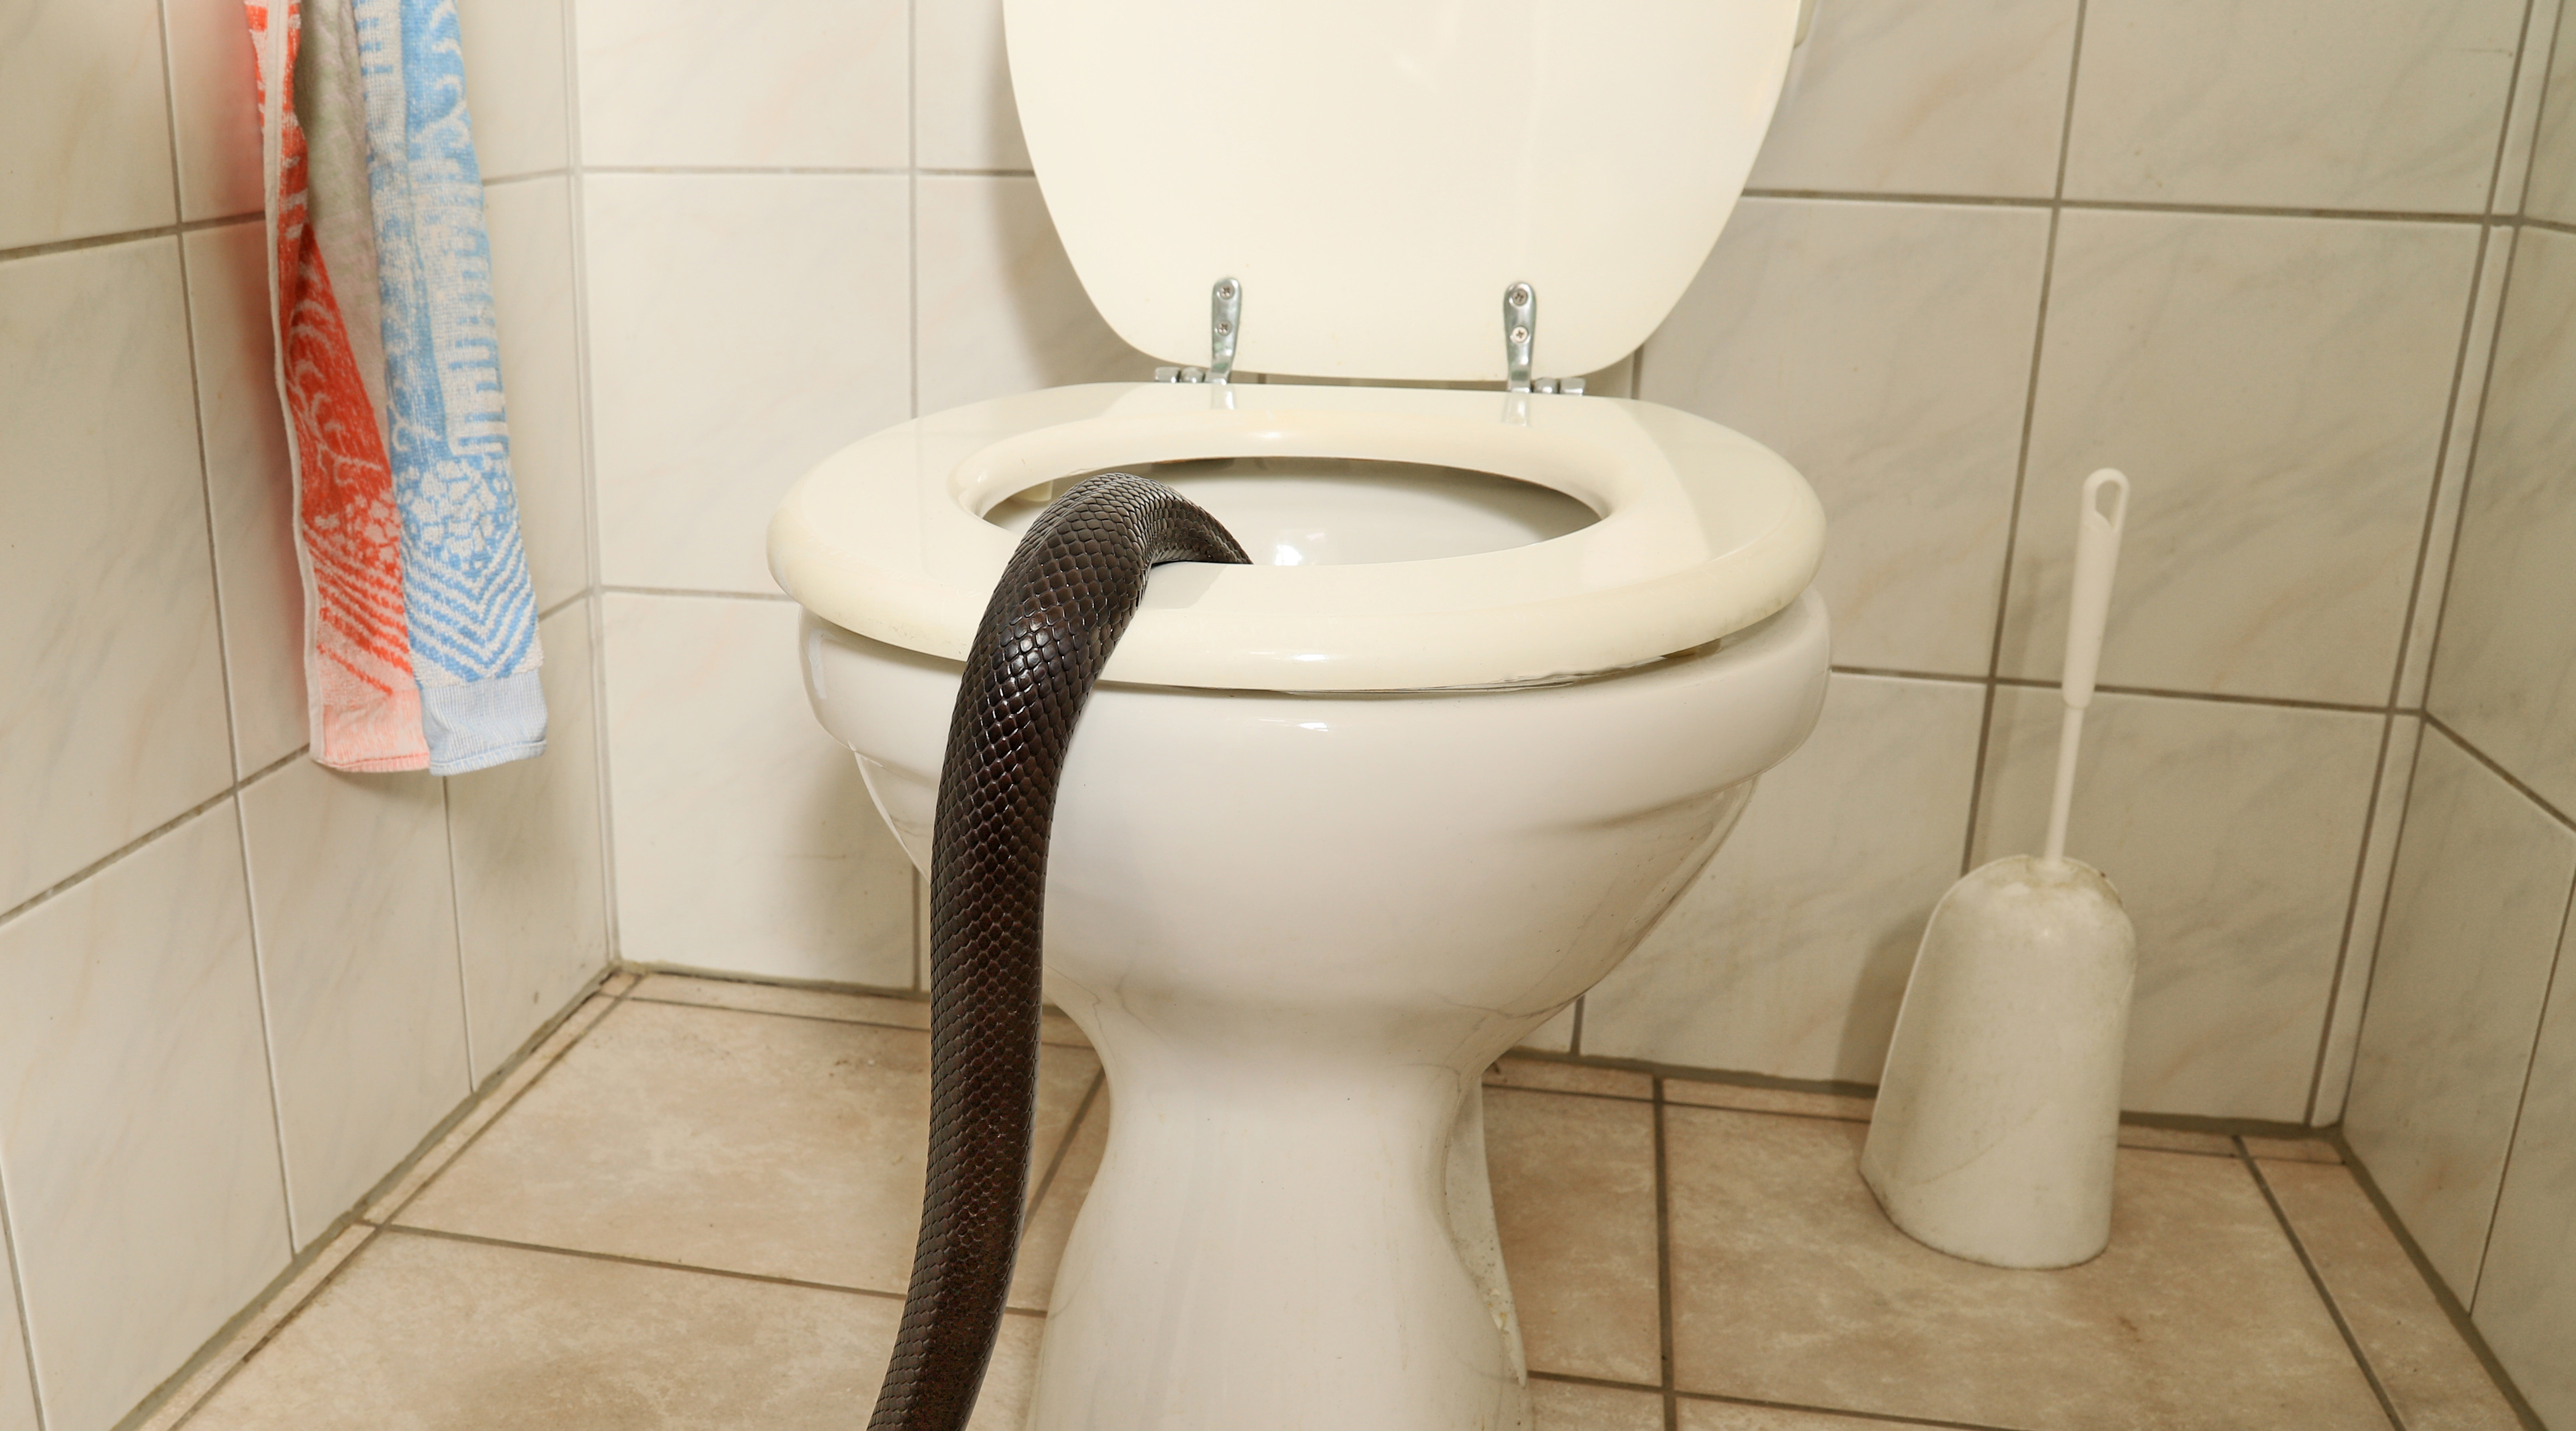 10ft snake pulled from toilet after biting man's bum